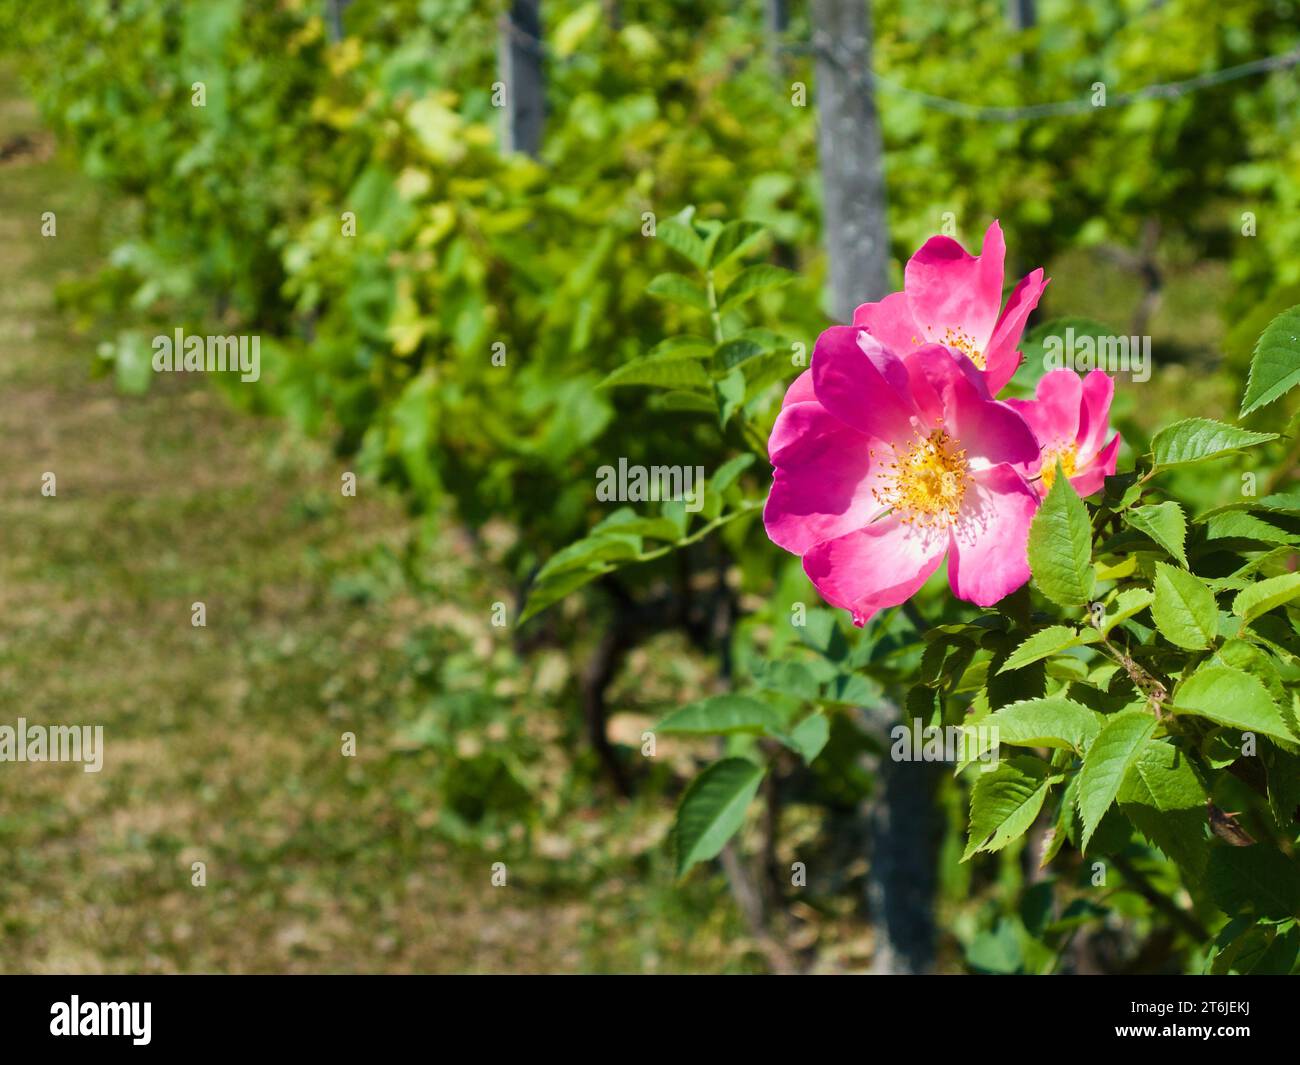 Vineyard with green vine plants and a flowering pink dog rose plant a sunny day in summer. Stock Photo